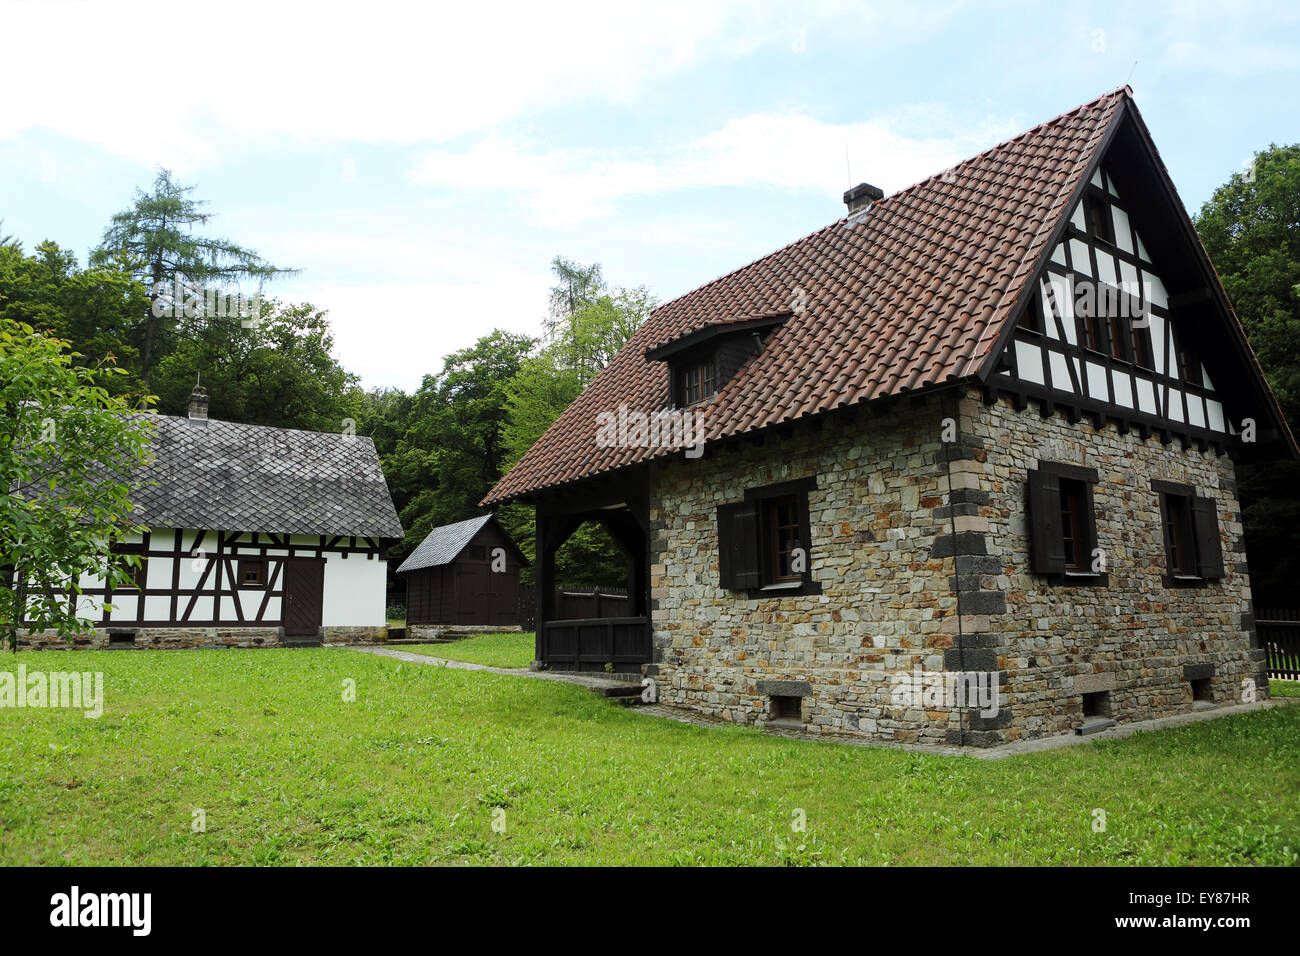 Buildings in the reconstructed Roman camp village at Saalburg near Bad Homburg, Germany. Stock Photo